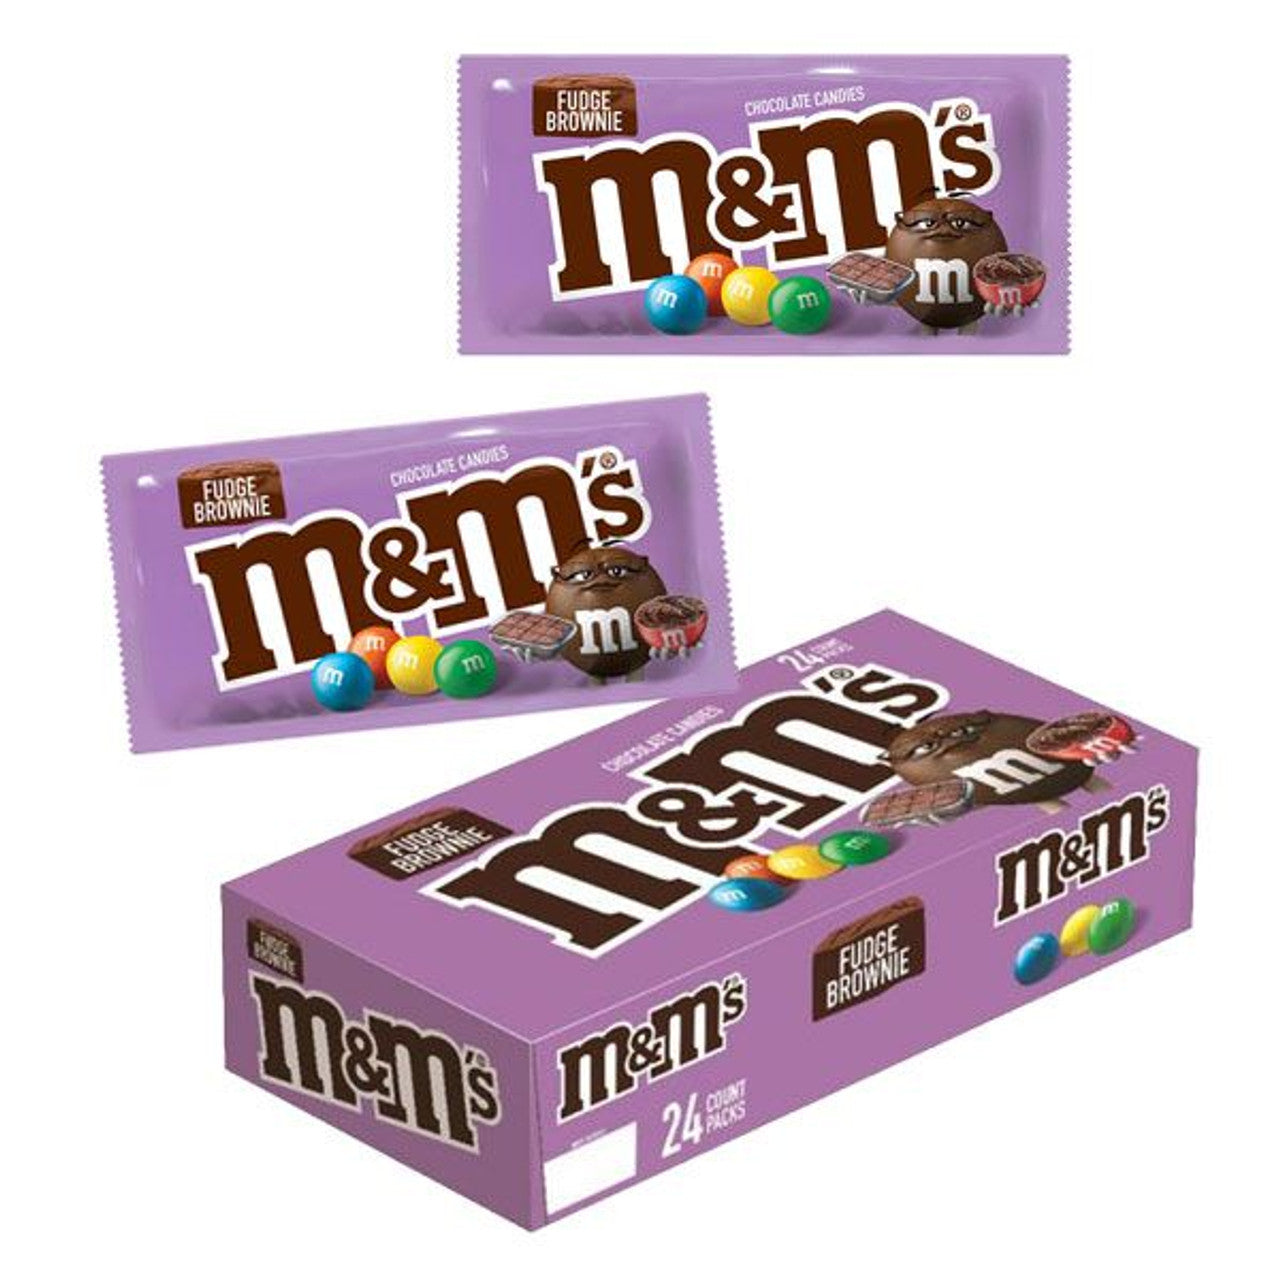 M&M'S Fudge Brownie Chocolate Candy - Sharing Size - Shop Candy at